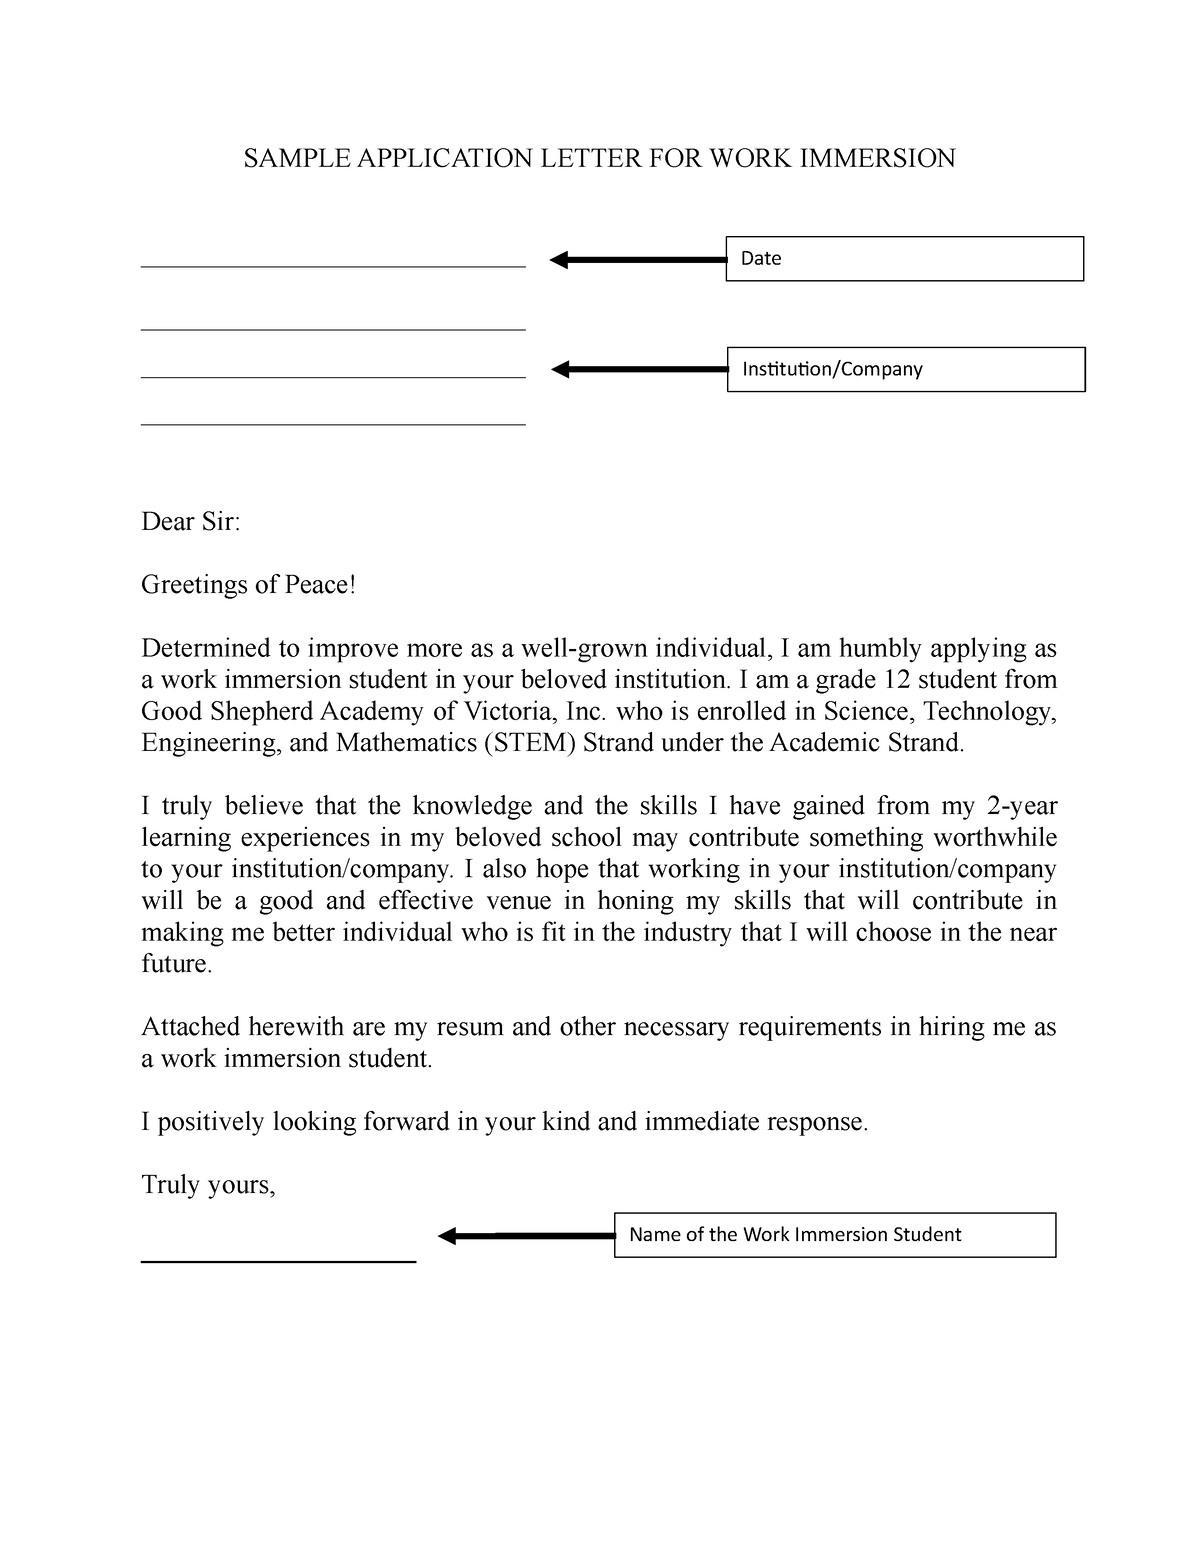 example of application letter for work immersion humss student